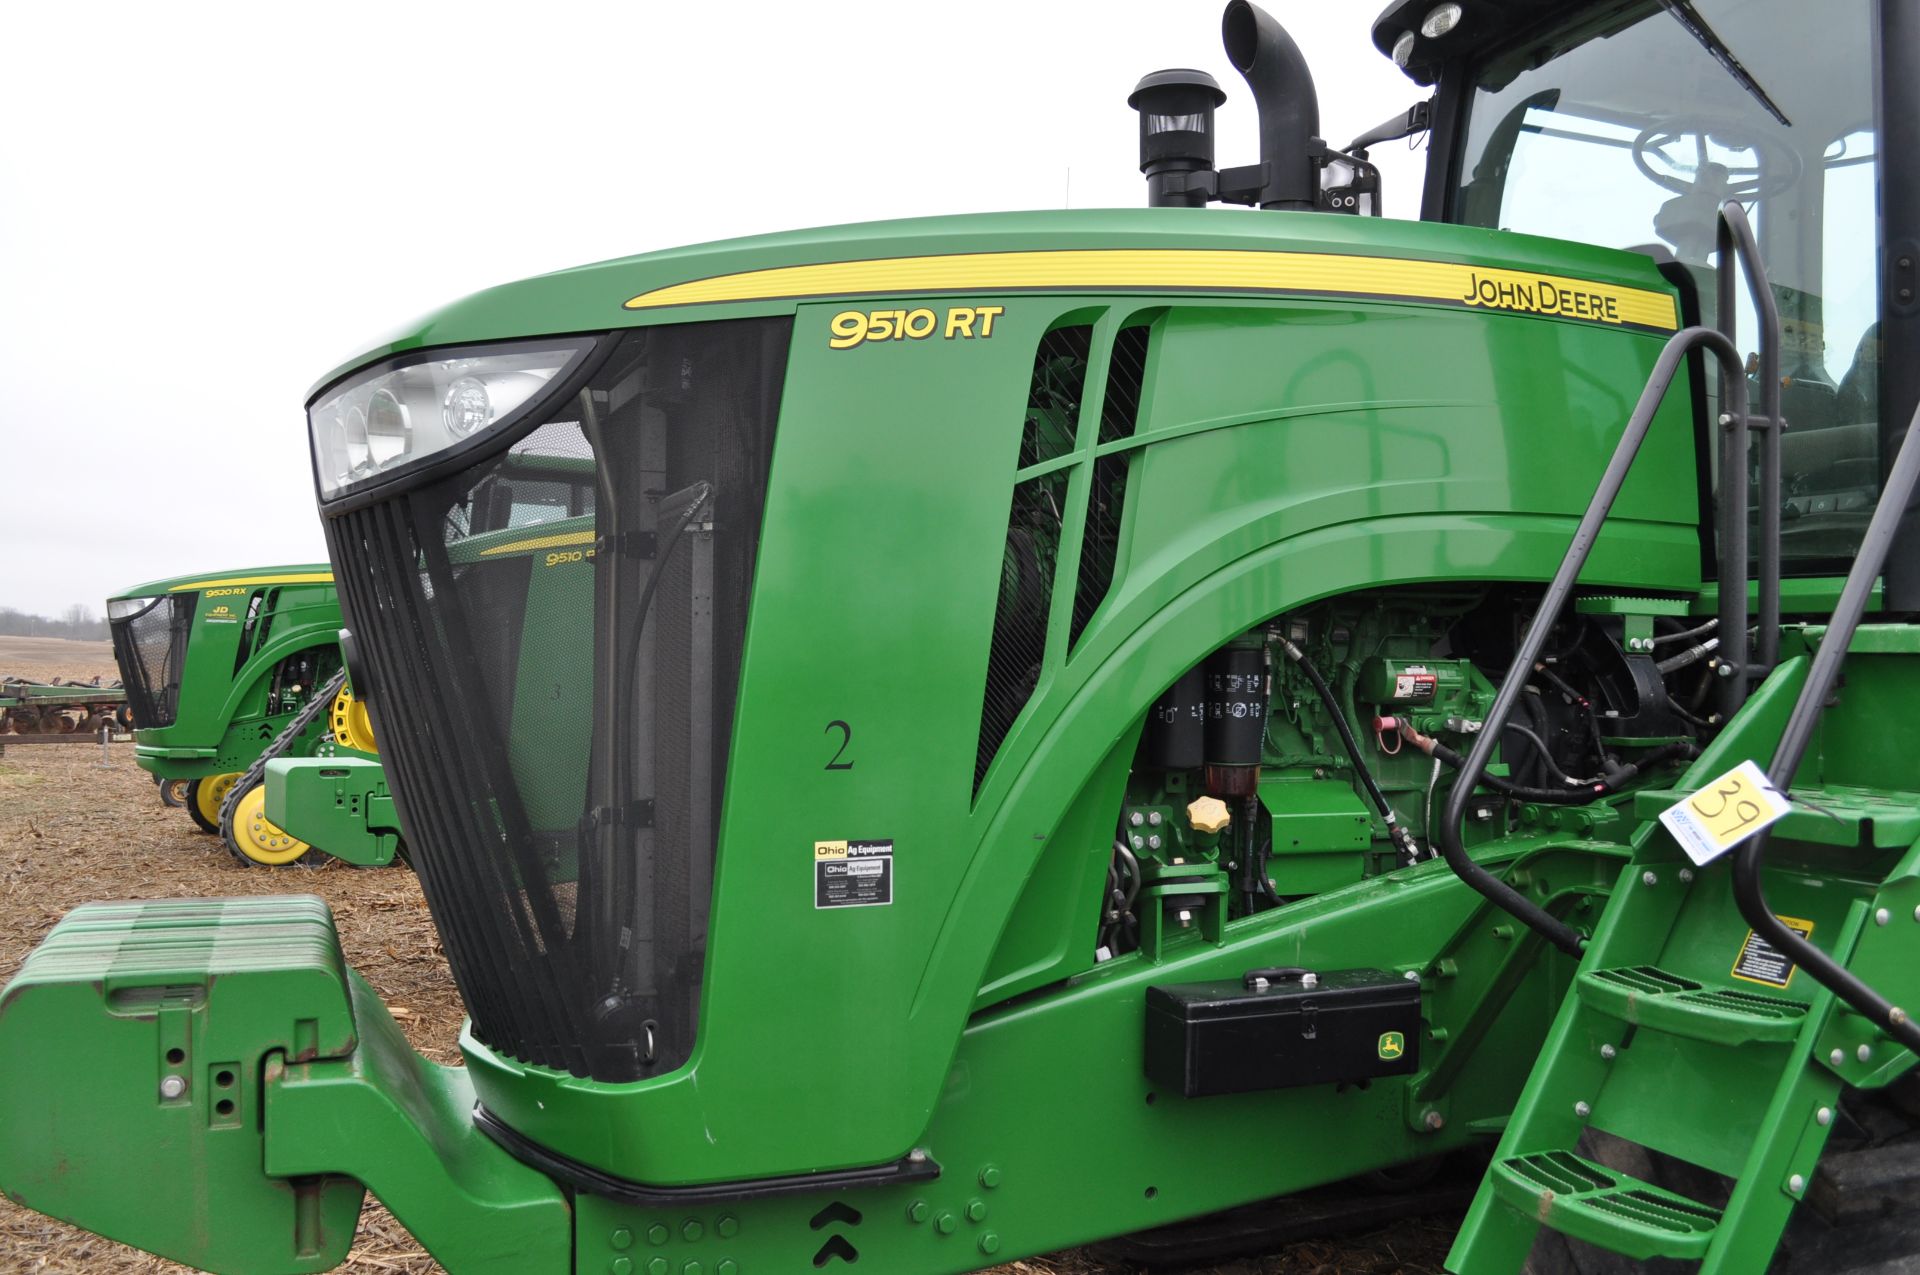 John Deere 9510RT track tractor, 36” belts, front weights, Powershift, 6 hyd remotes, 1000 PTO - Image 27 of 37